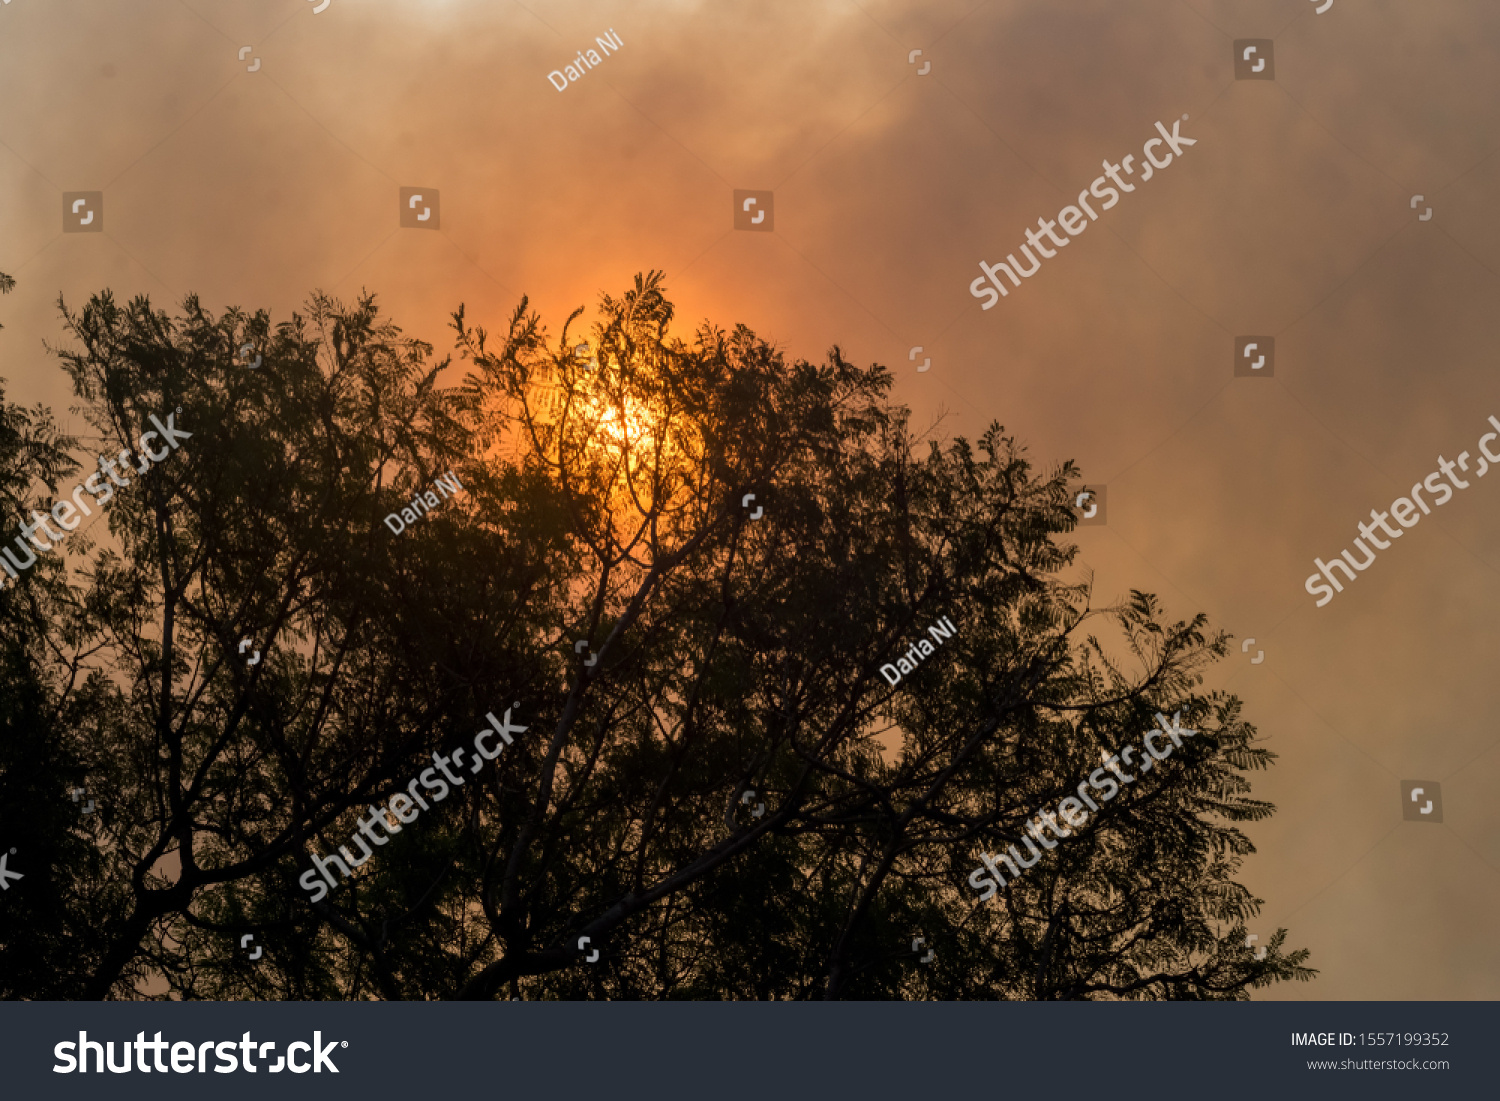 Australian bushfire: trees silhouettes and smoke from bushfires covers the sky and glowing sun barely seen through the smoke. Catastrophic fire danger, NSW, Australia #1557199352